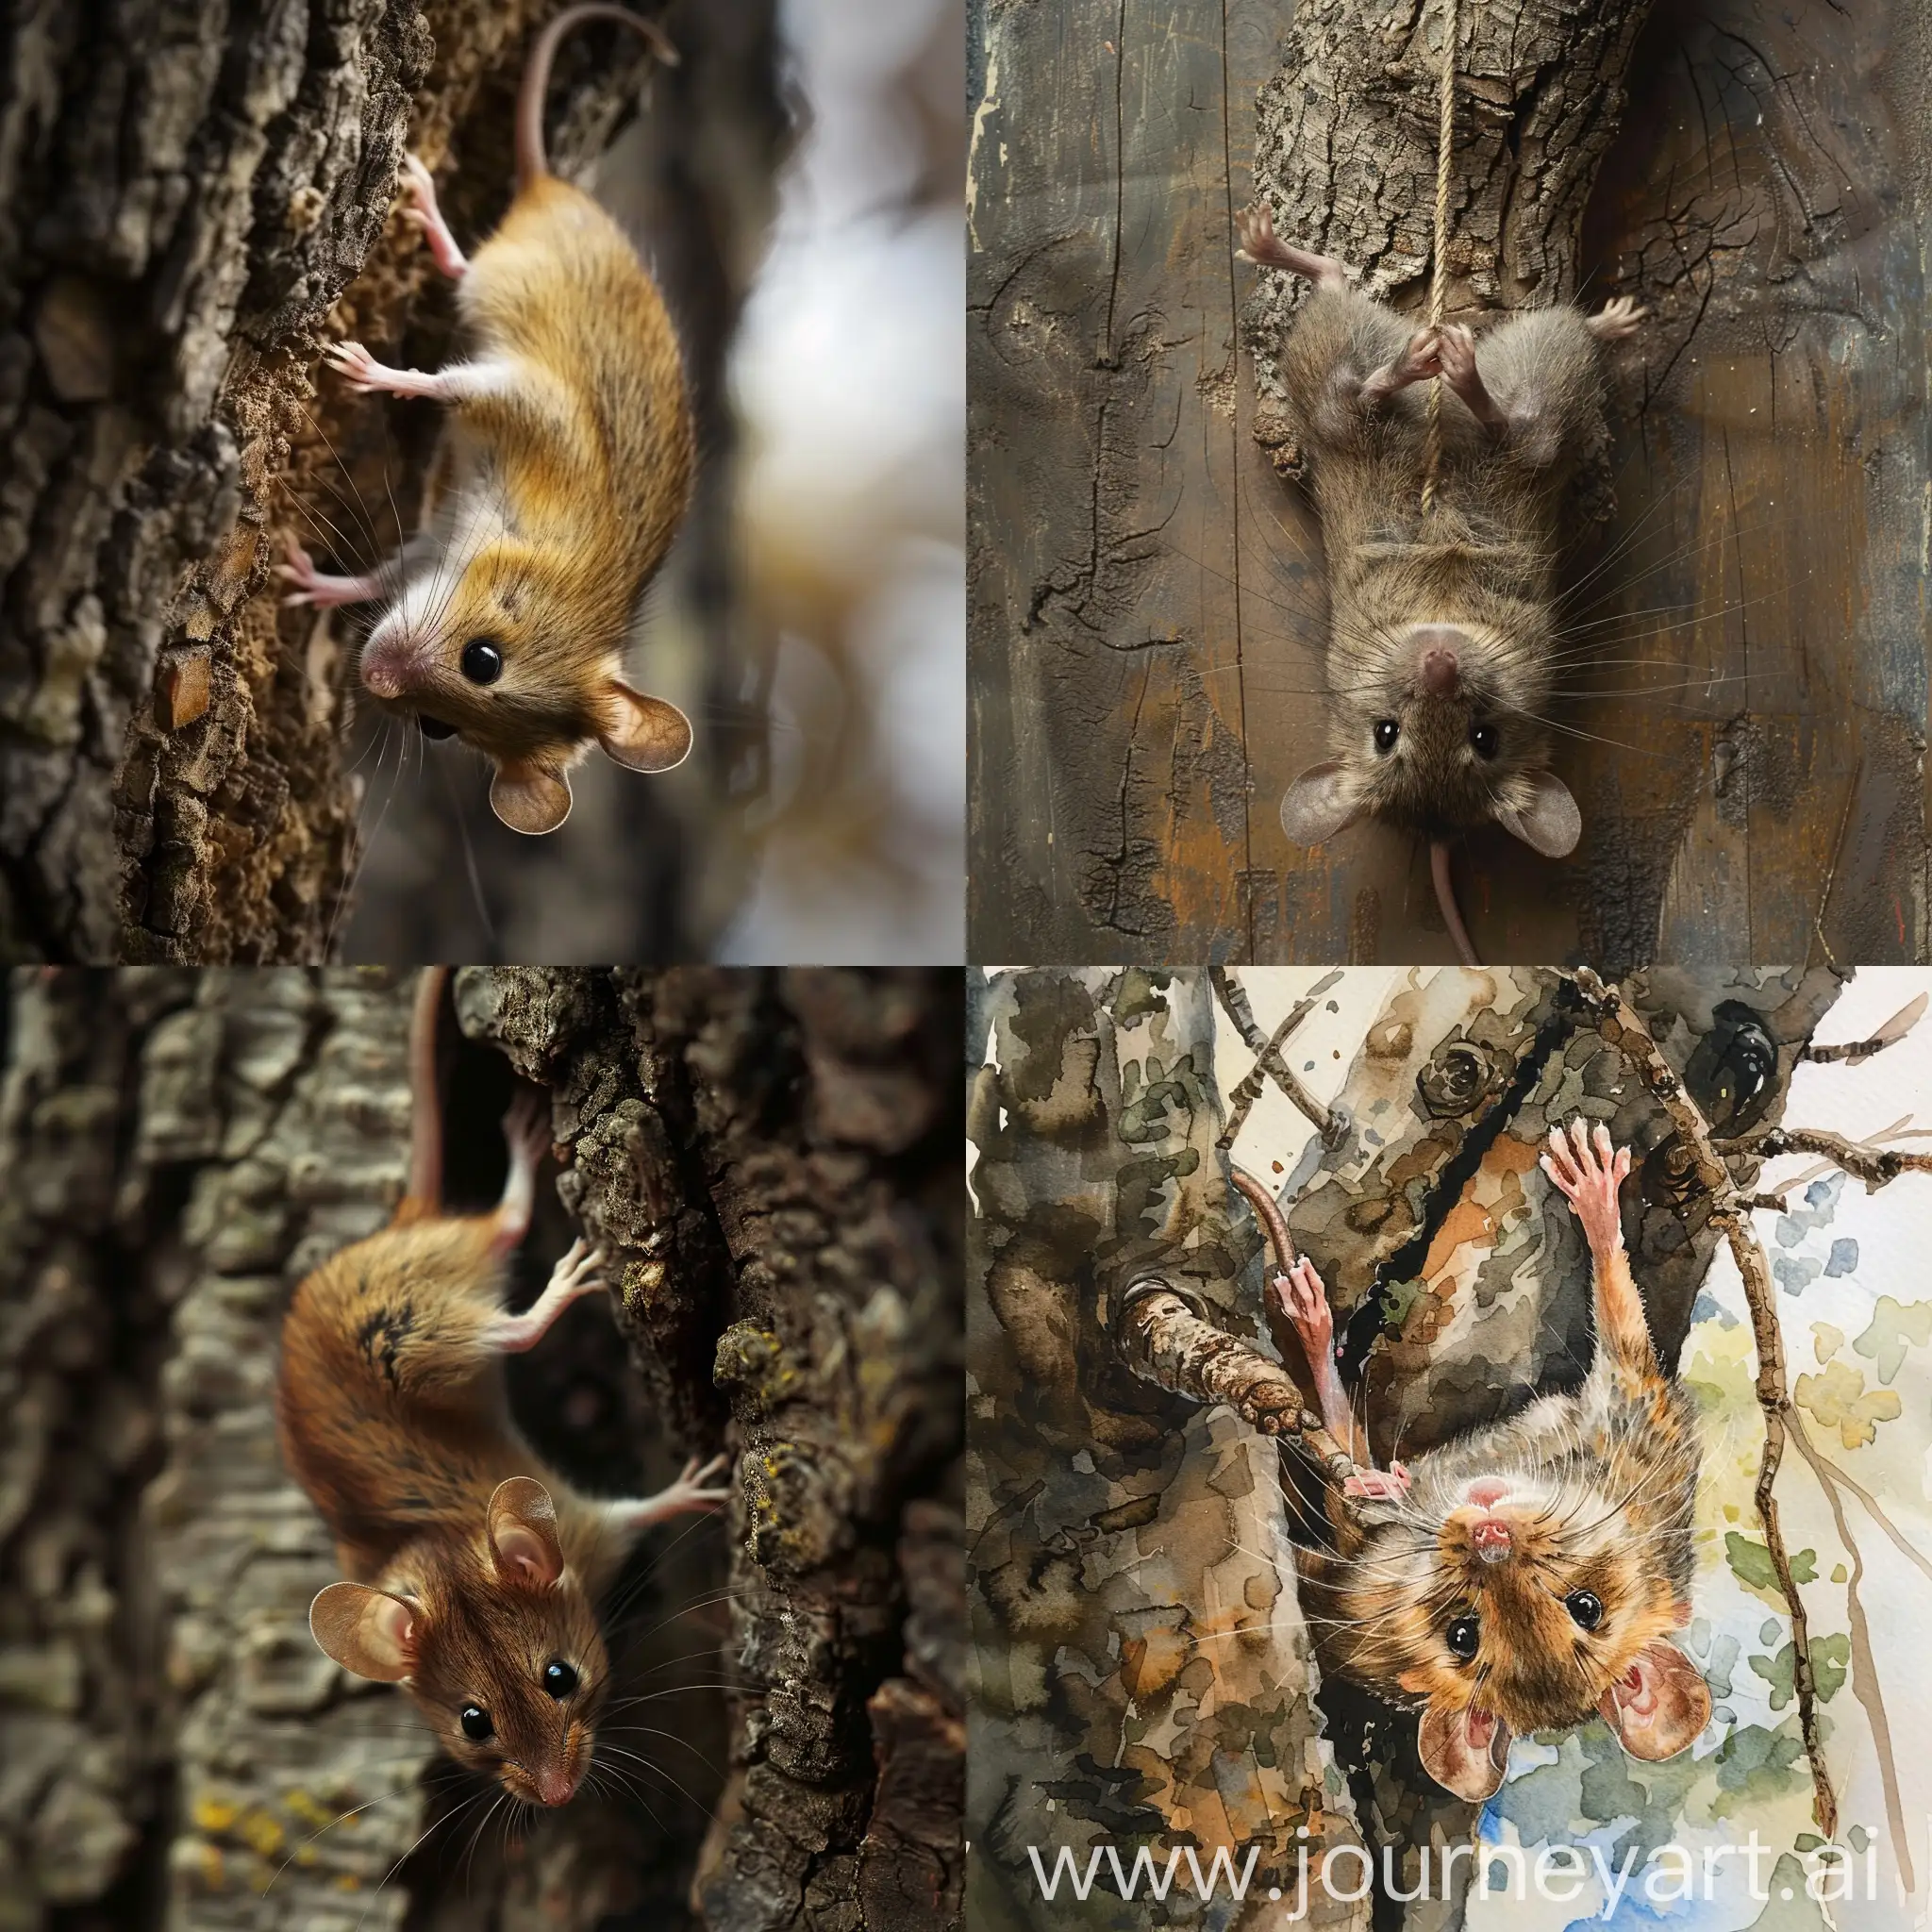 Mouse-Hanging-Upside-Down-on-Tree-Branch